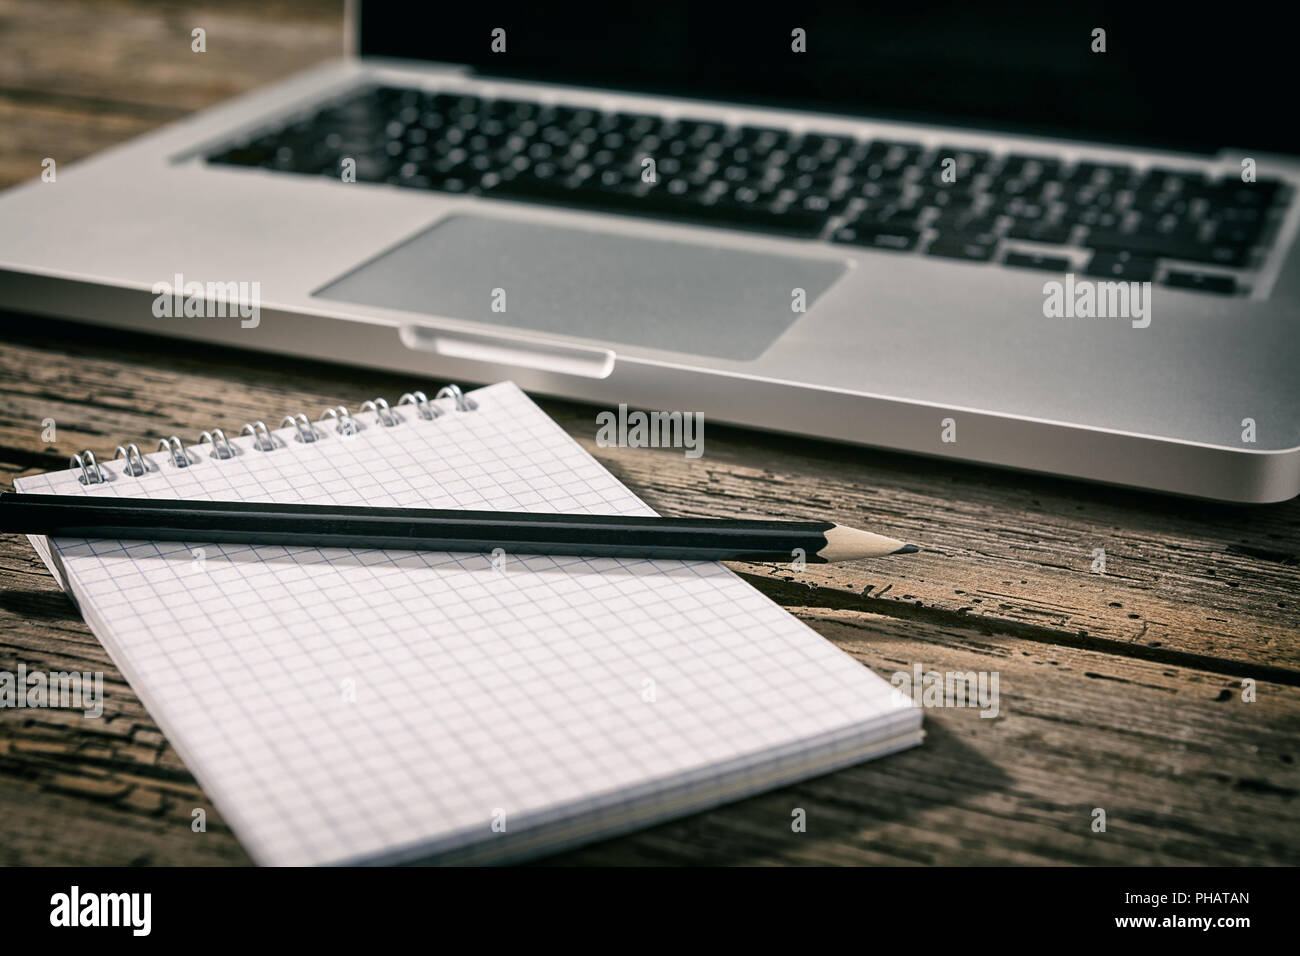 Office workstation with laptop, notebook and pencil Stock Photo